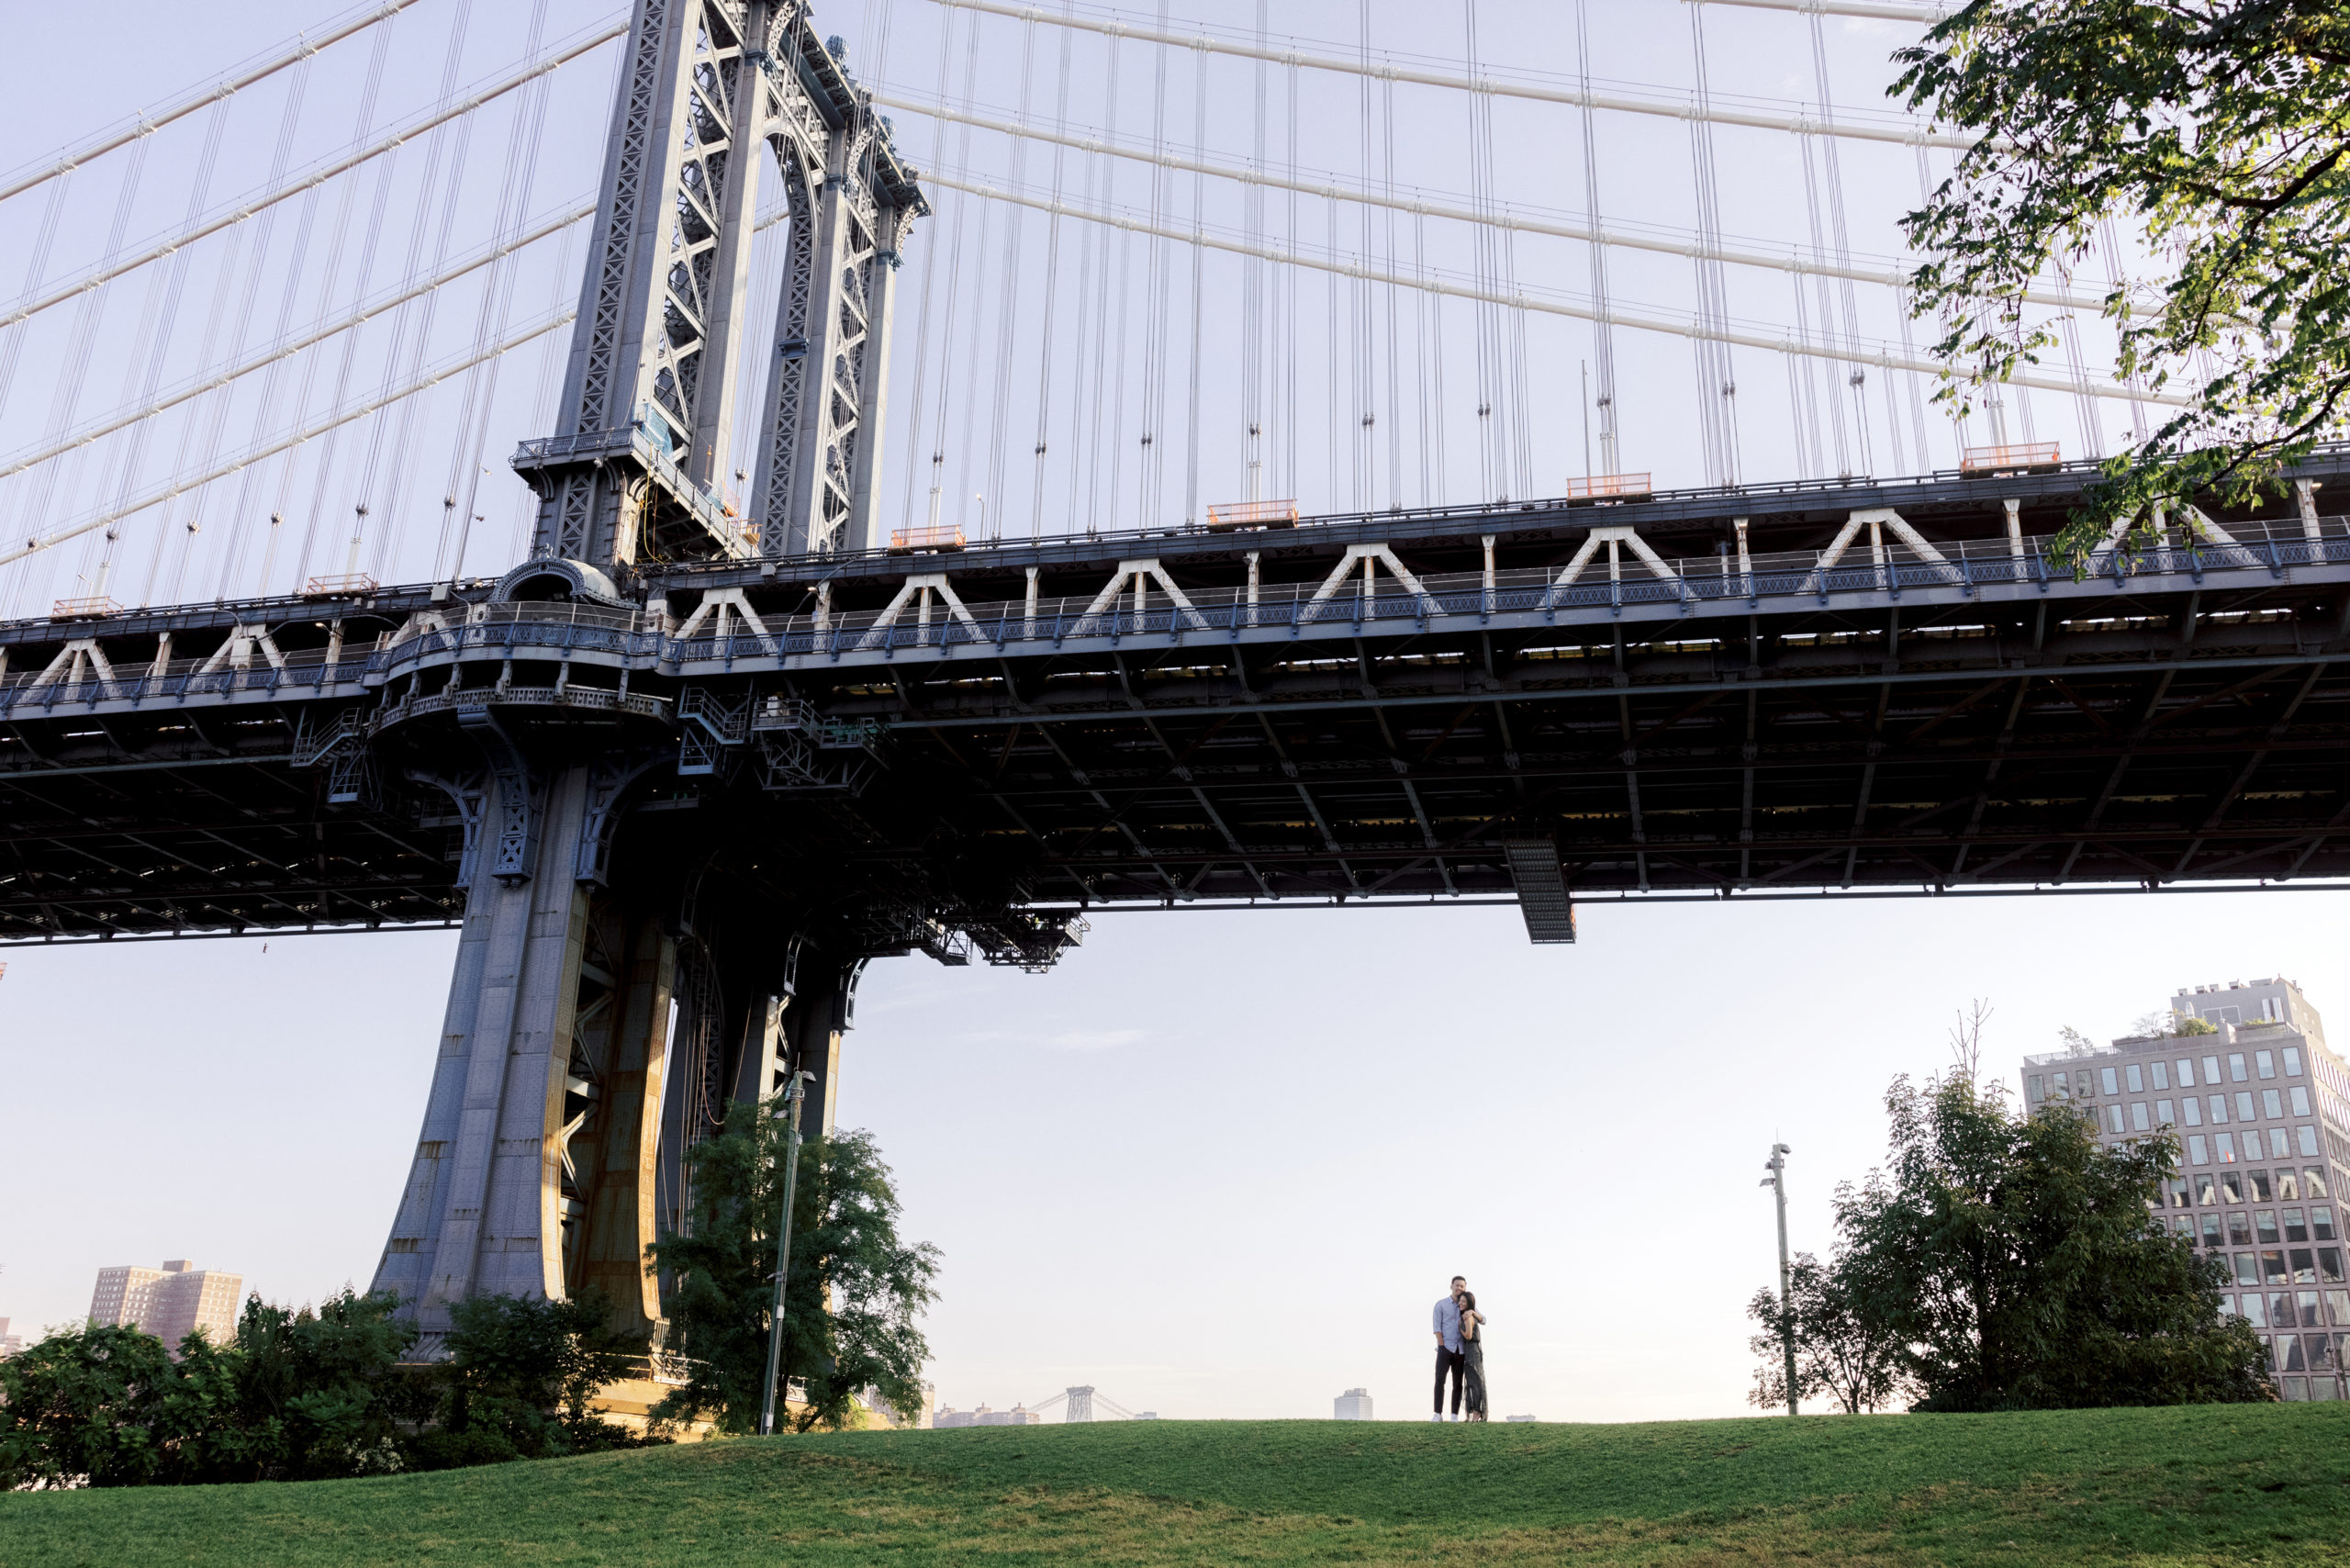 The couple are standing underneath the Brooklyn Bridge. Image by professional engagement photographer Jenny Fu